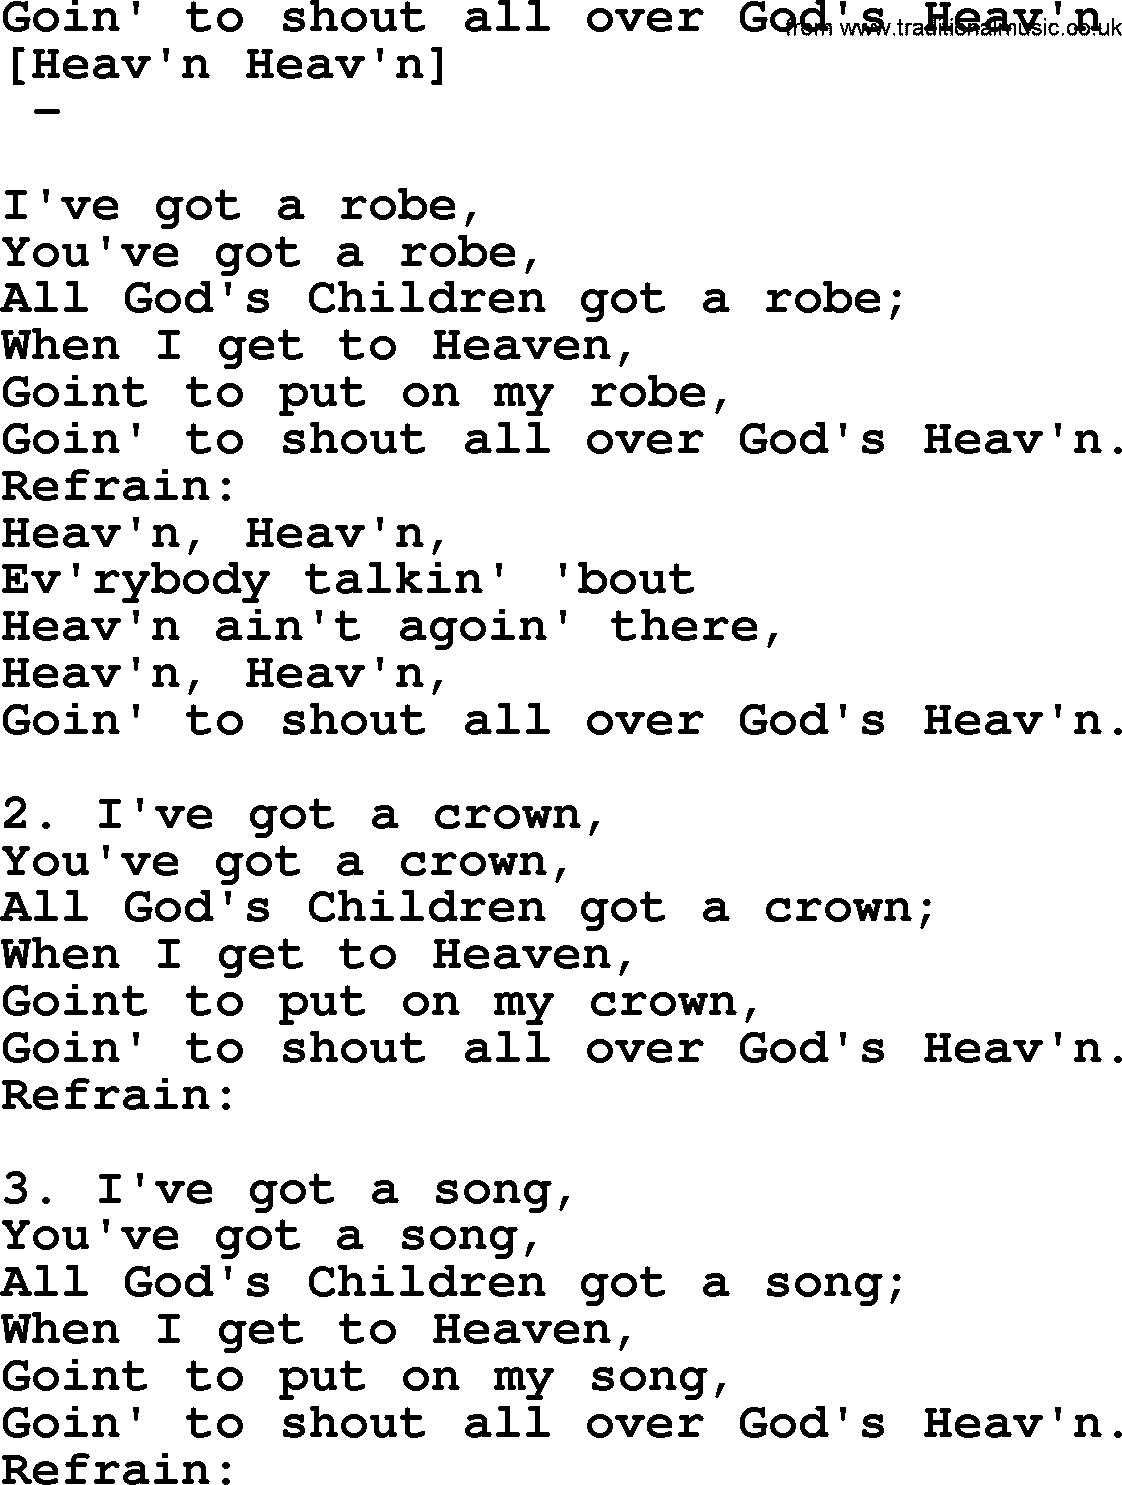 Old American Song: Goin' To Shout All Over God's Heav'n, lyrics